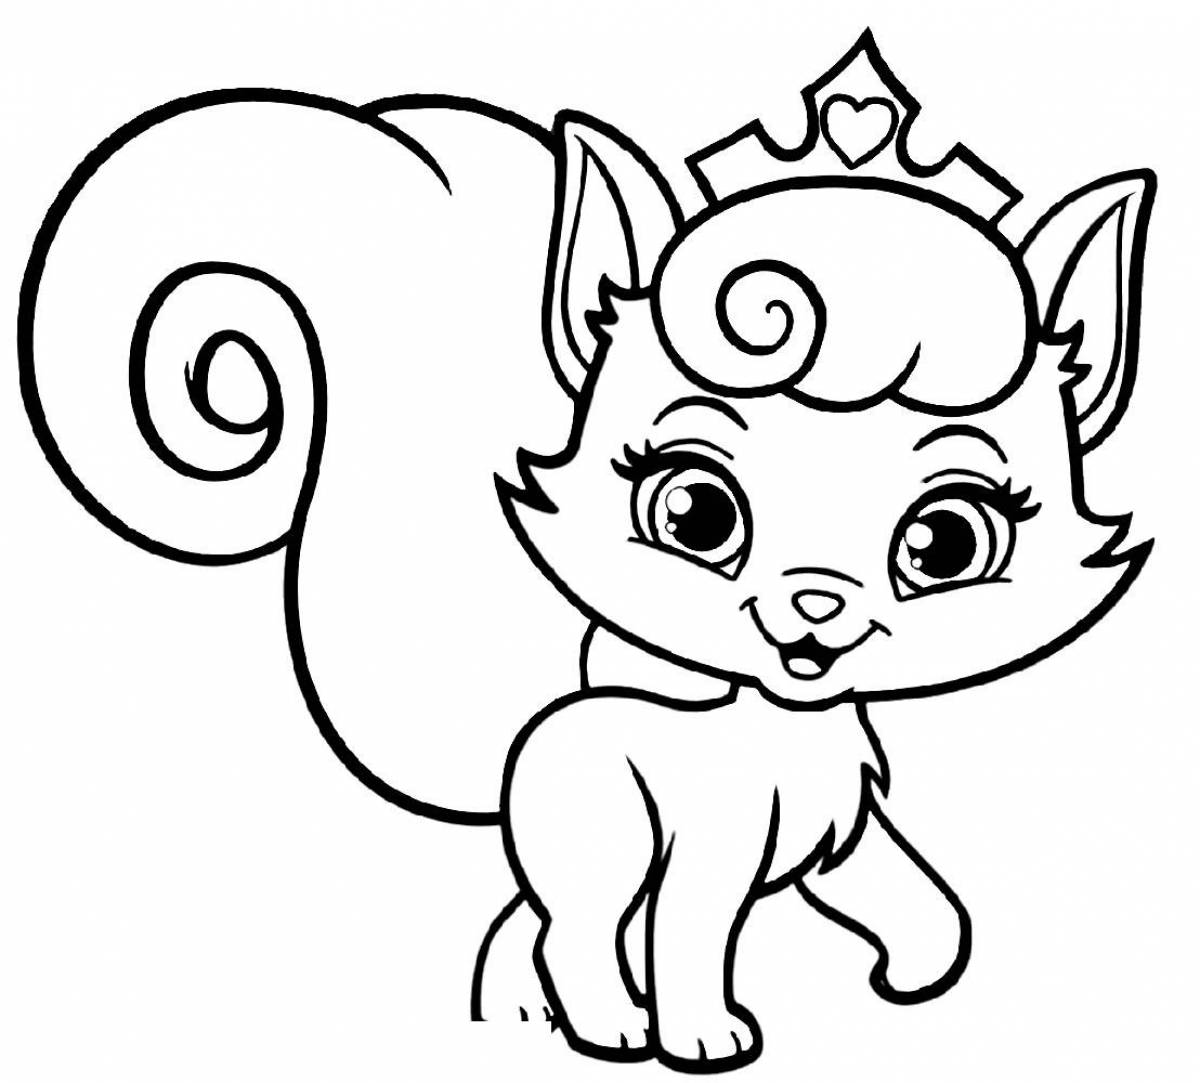 Cute doggie kitties coloring pages for kids